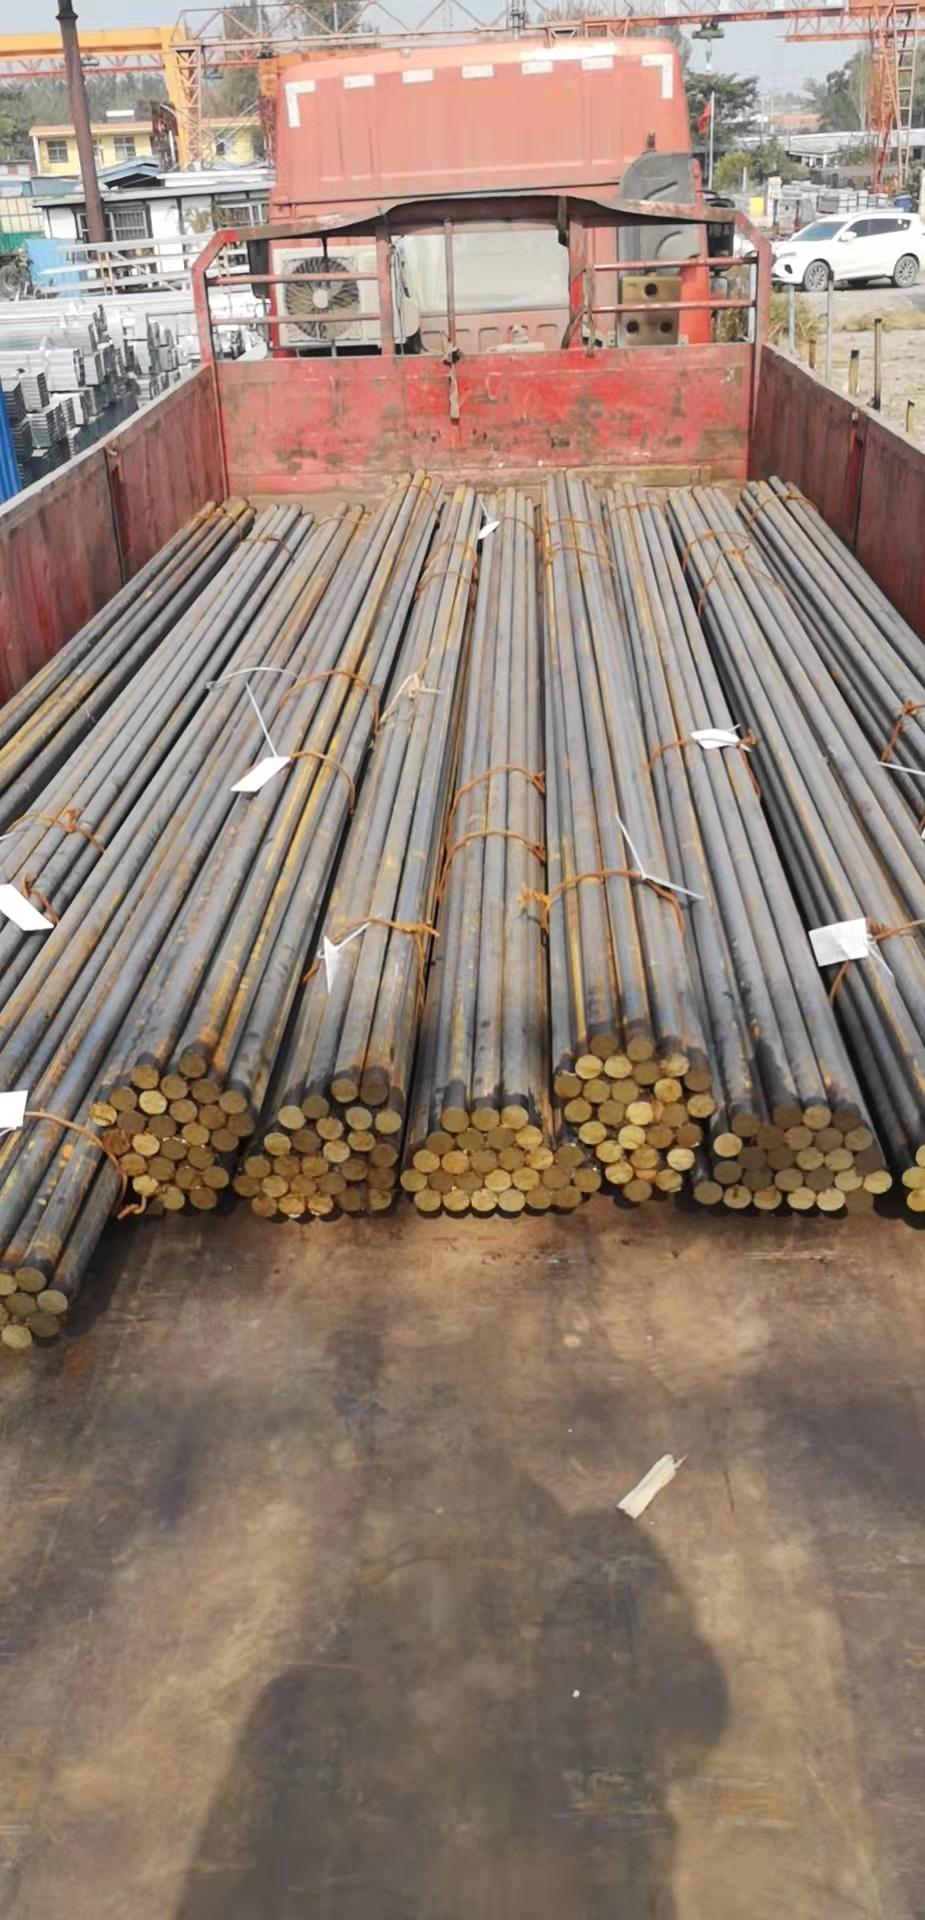 AISI 4140 Q235 ASTM A36 Round Bars 4140 Alloy Steel Price